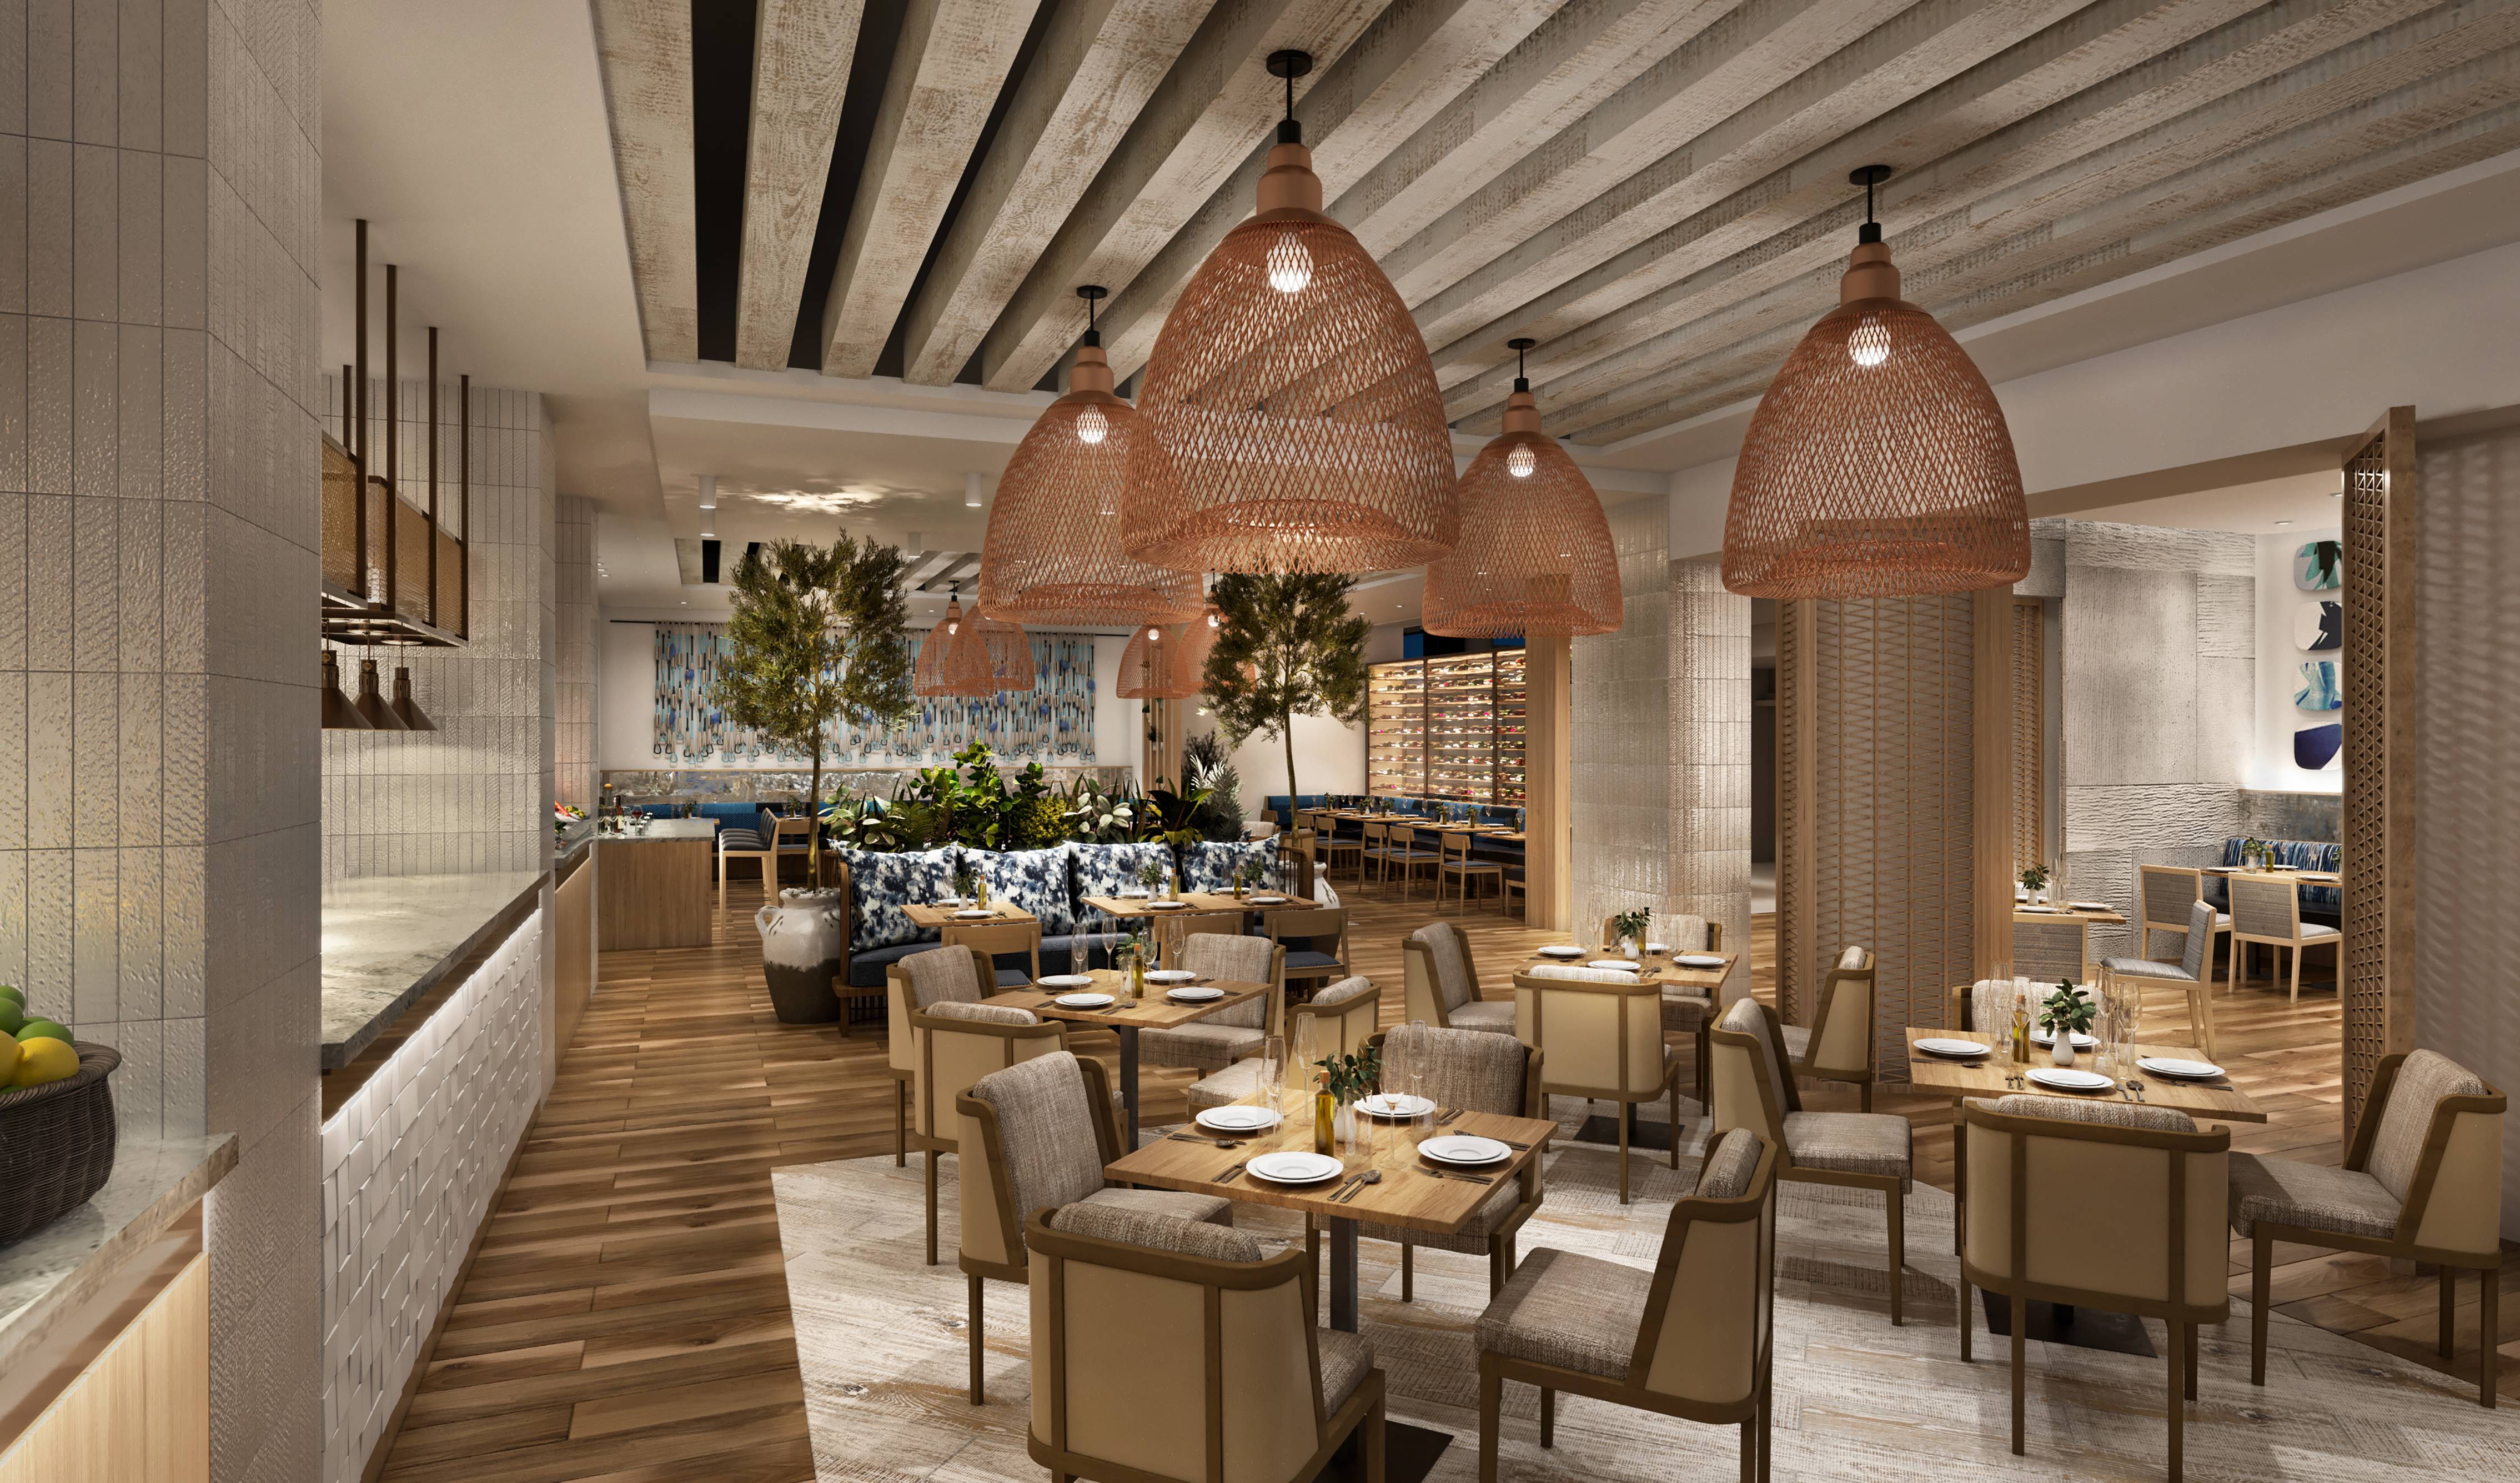 Four new restaurants to open at The Walt Disney World Reserve including the signature restaurant Amare